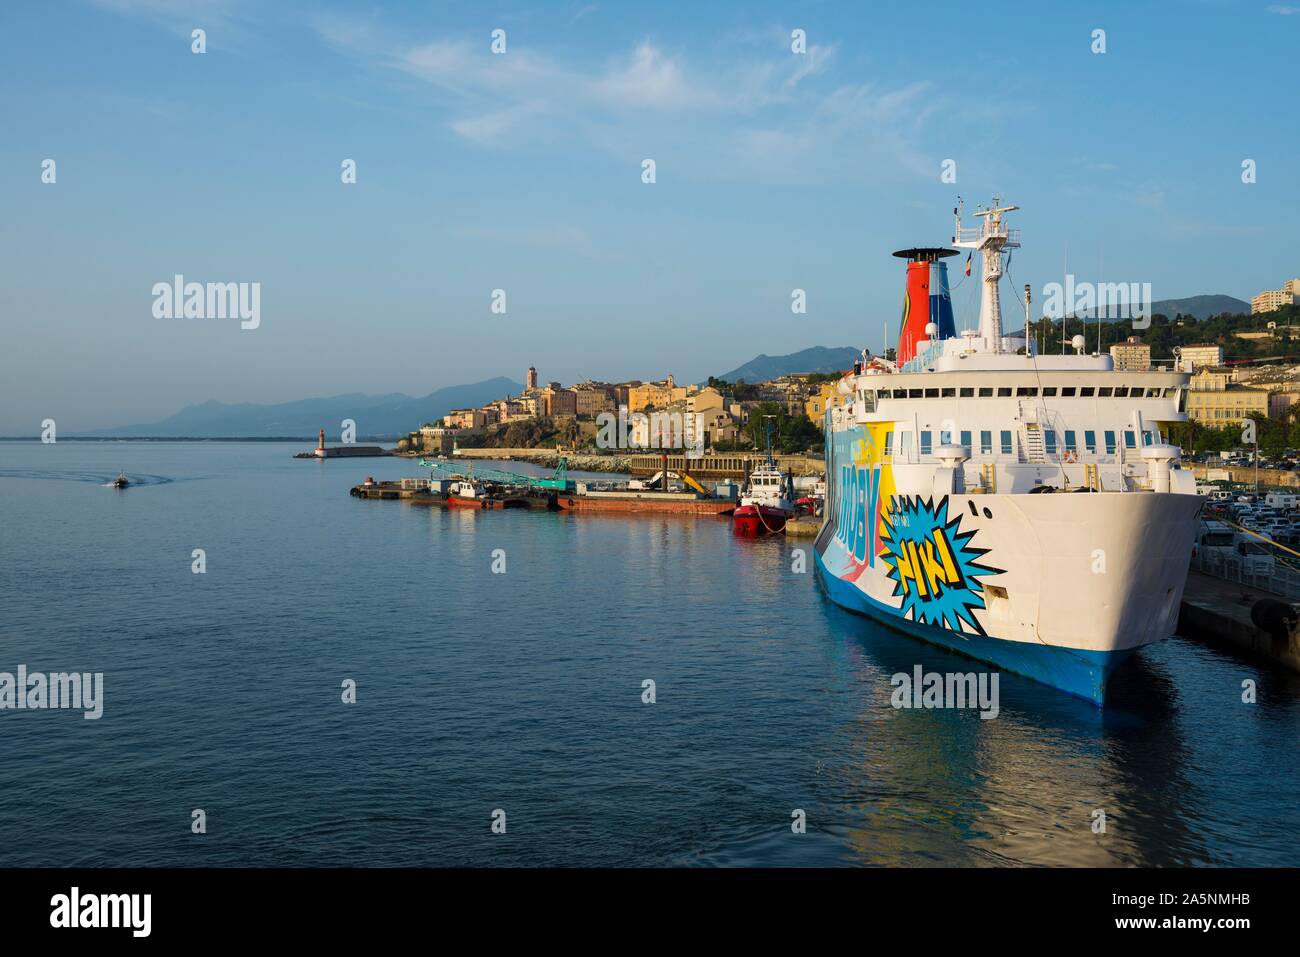 City view with ferry port and ferries, morning mood, Bastia, Corsica, France Stock Photo